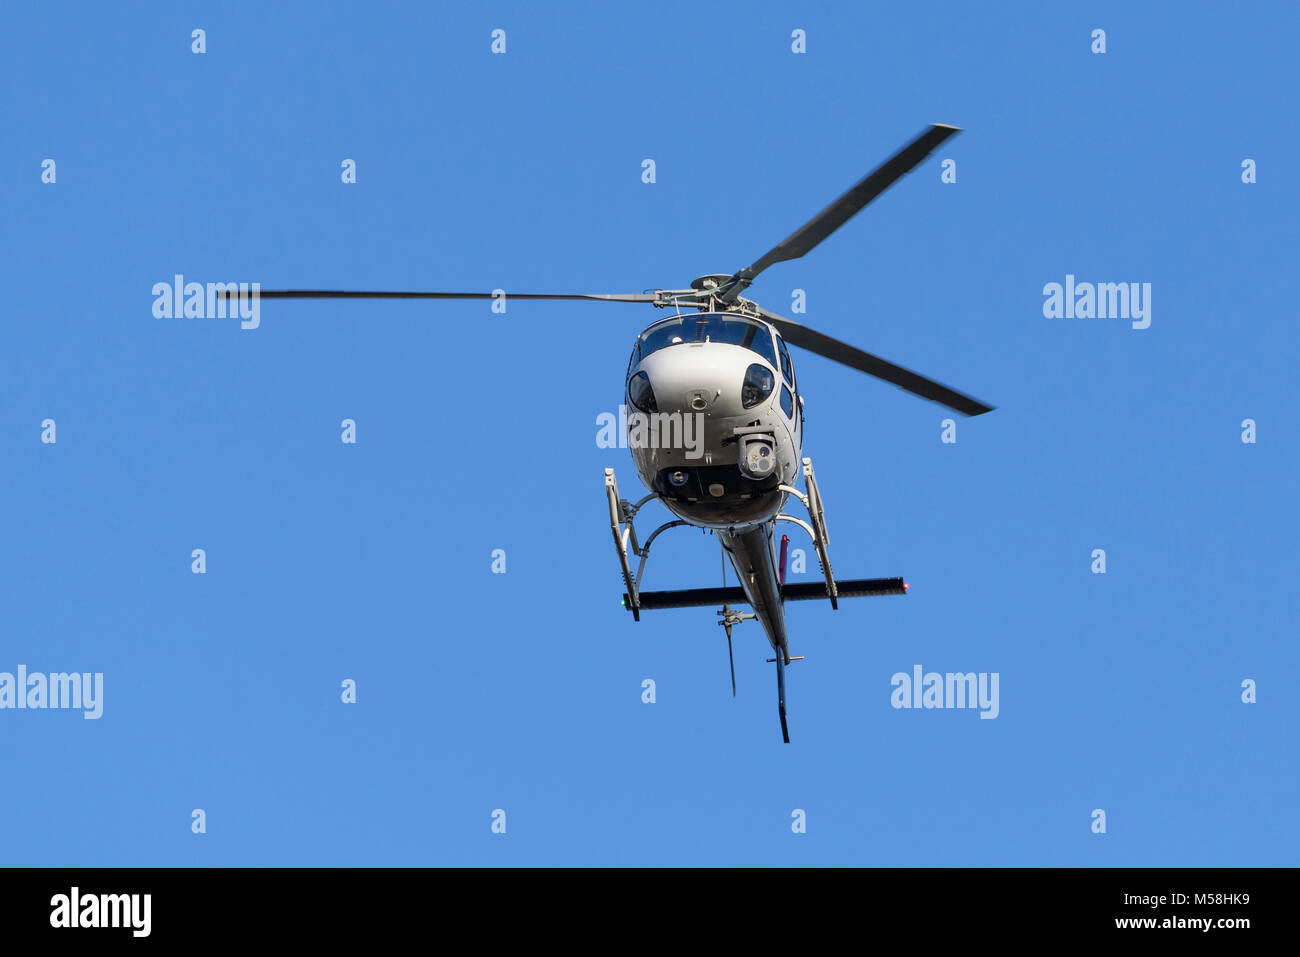 Squirrel helicopter with video camera Stock Photo